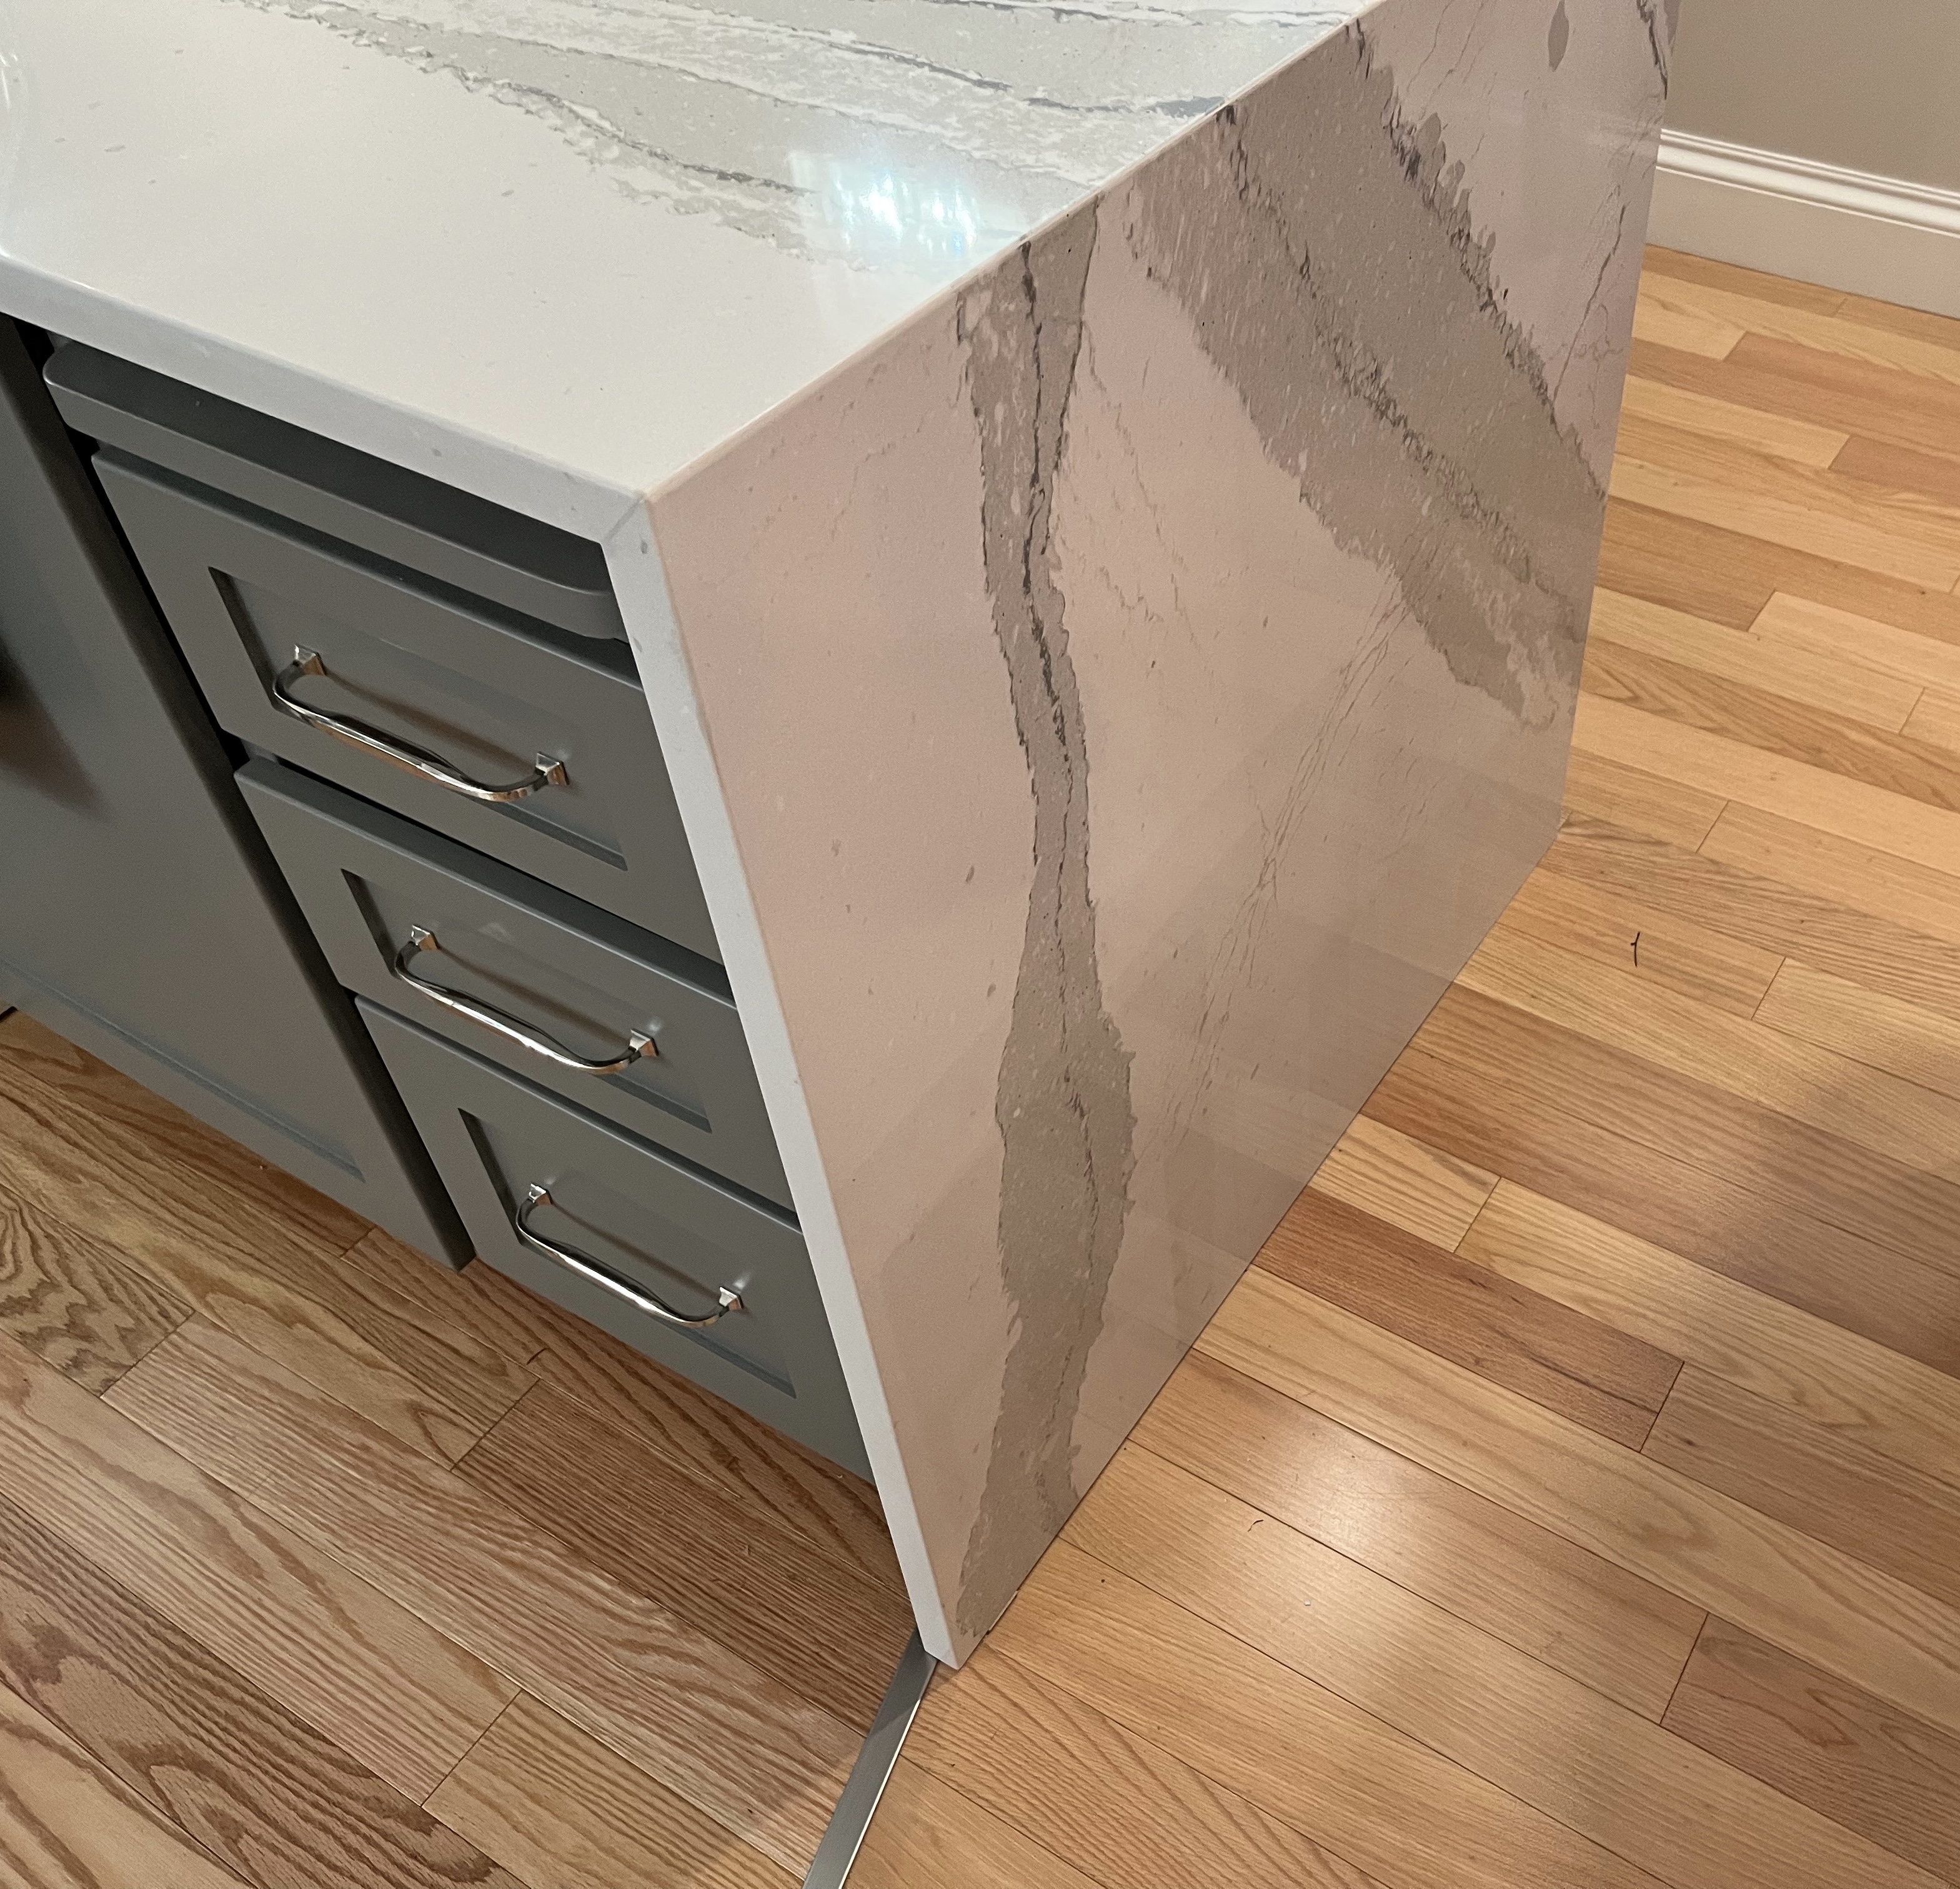 Quartz counter and waterfall panel